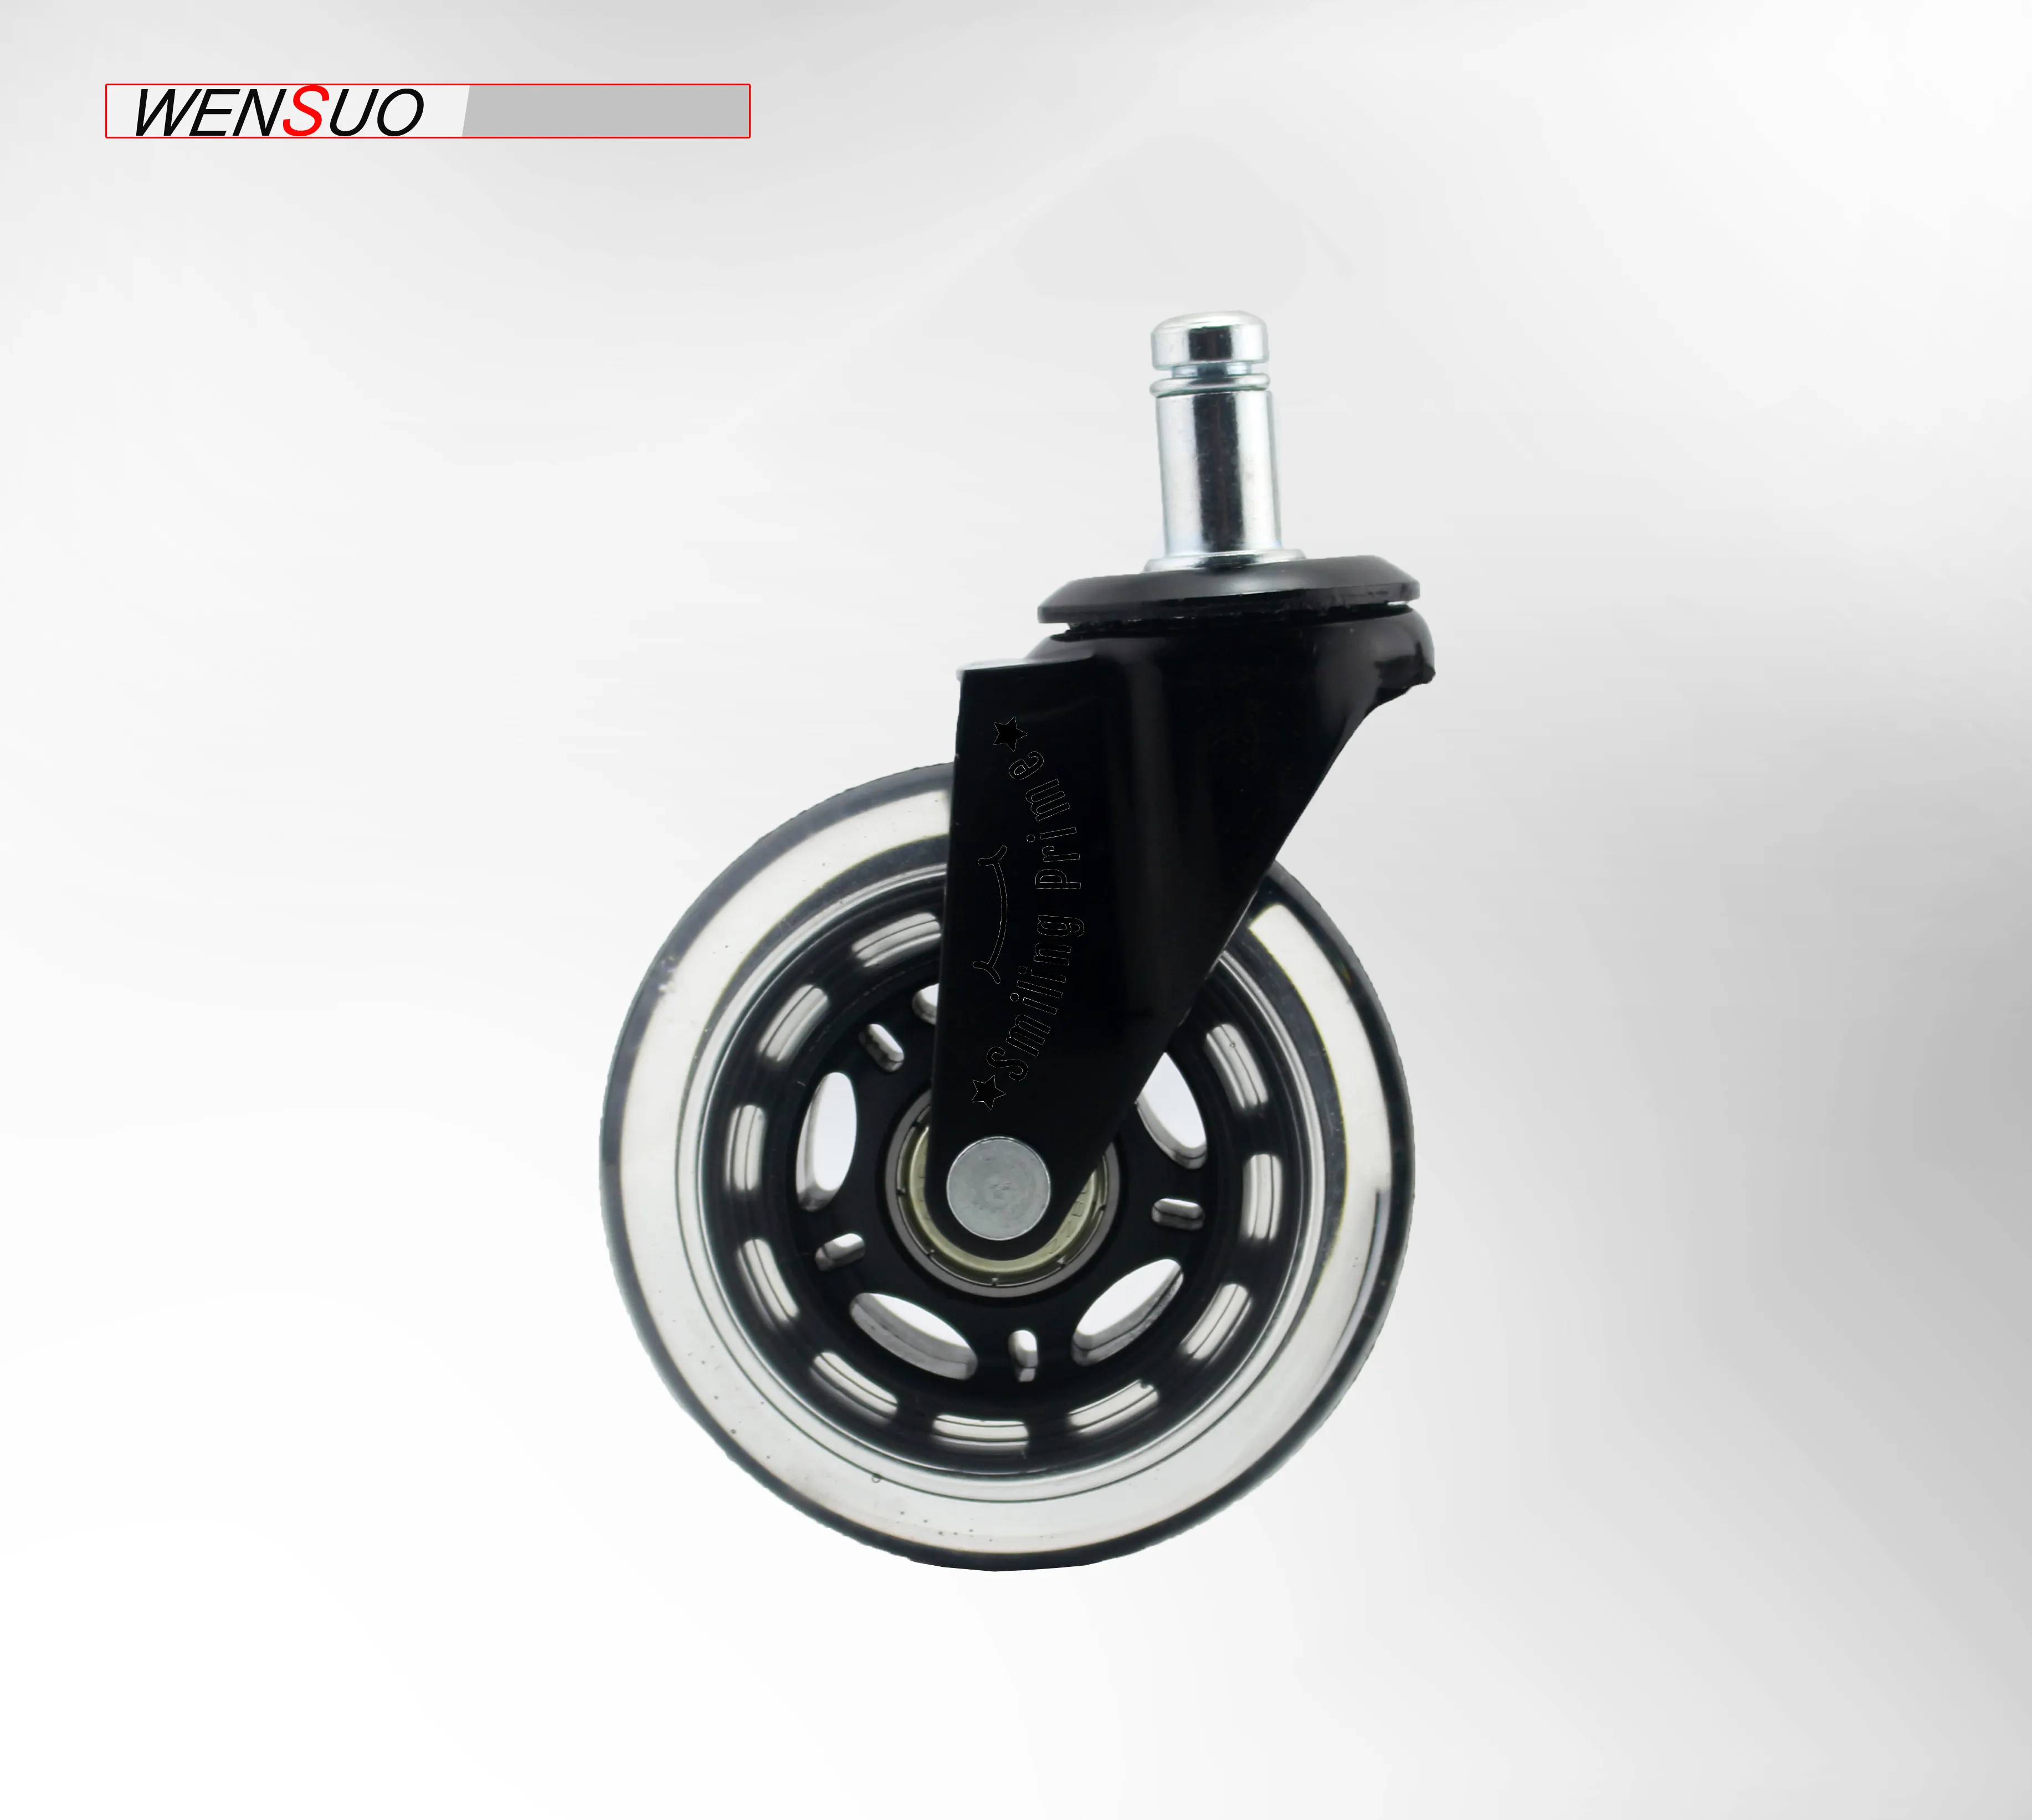 3 Inch PU Office Furniture Caster 75mm Chair Wheels